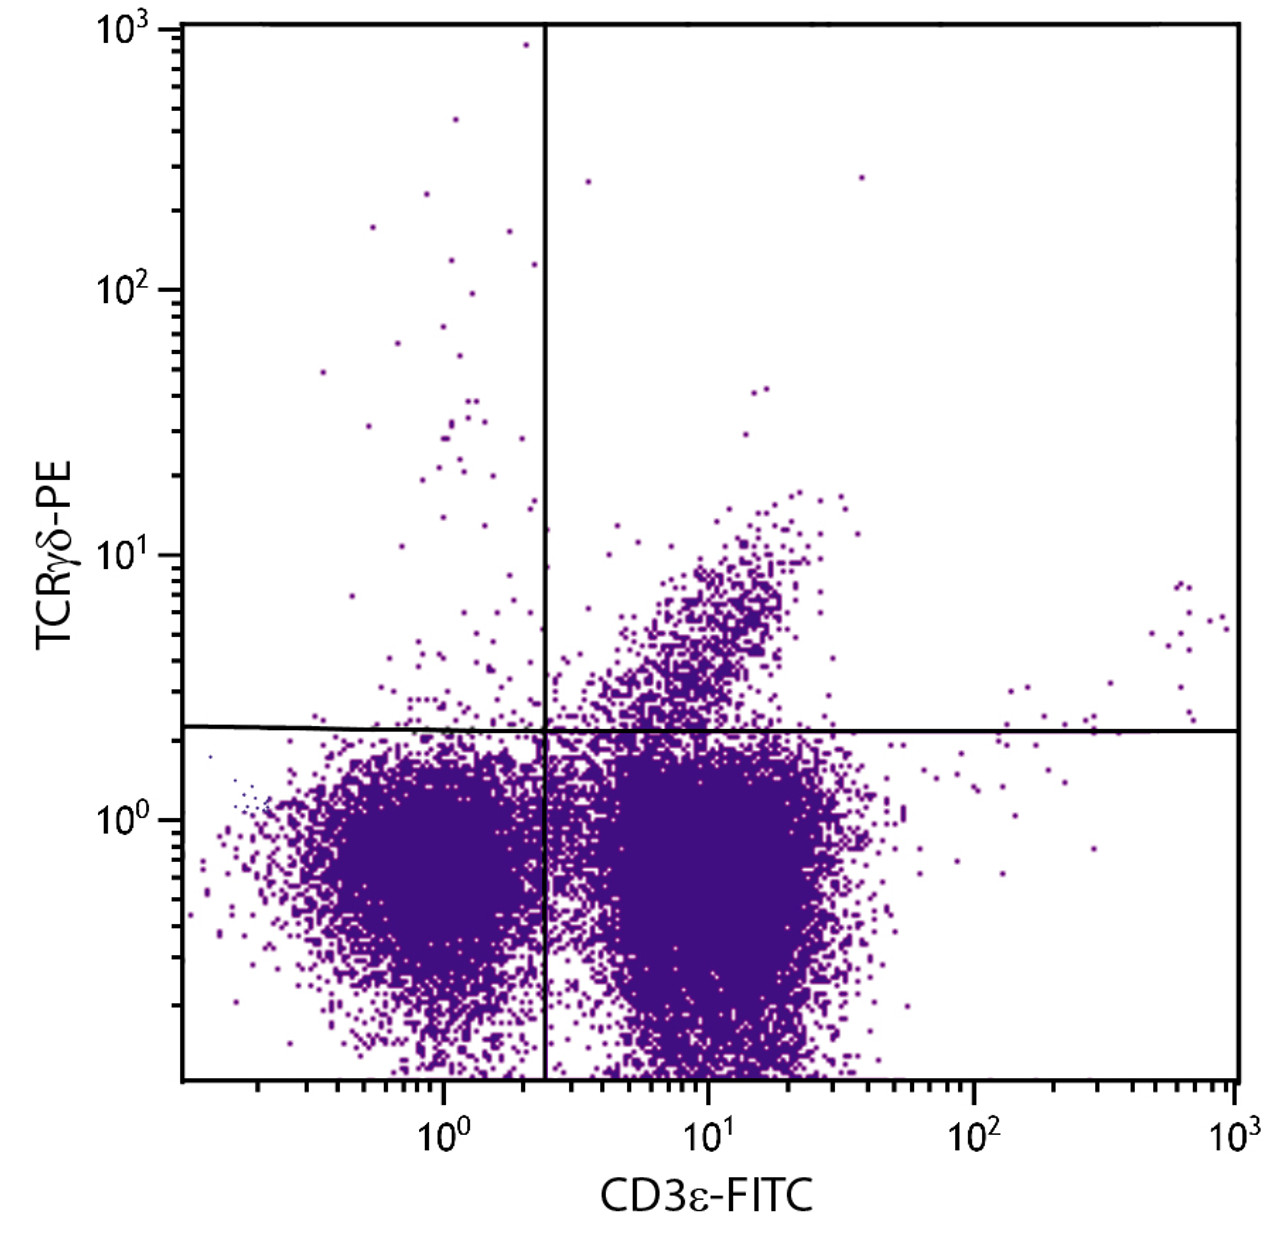 C57BL/6 mouse mesenteric lymph node cells were stained with Hamster Anti-Mouse TCR??-PE (Cat. No. 98-895) and Rat Anti-Mouse CD3?-FITC .